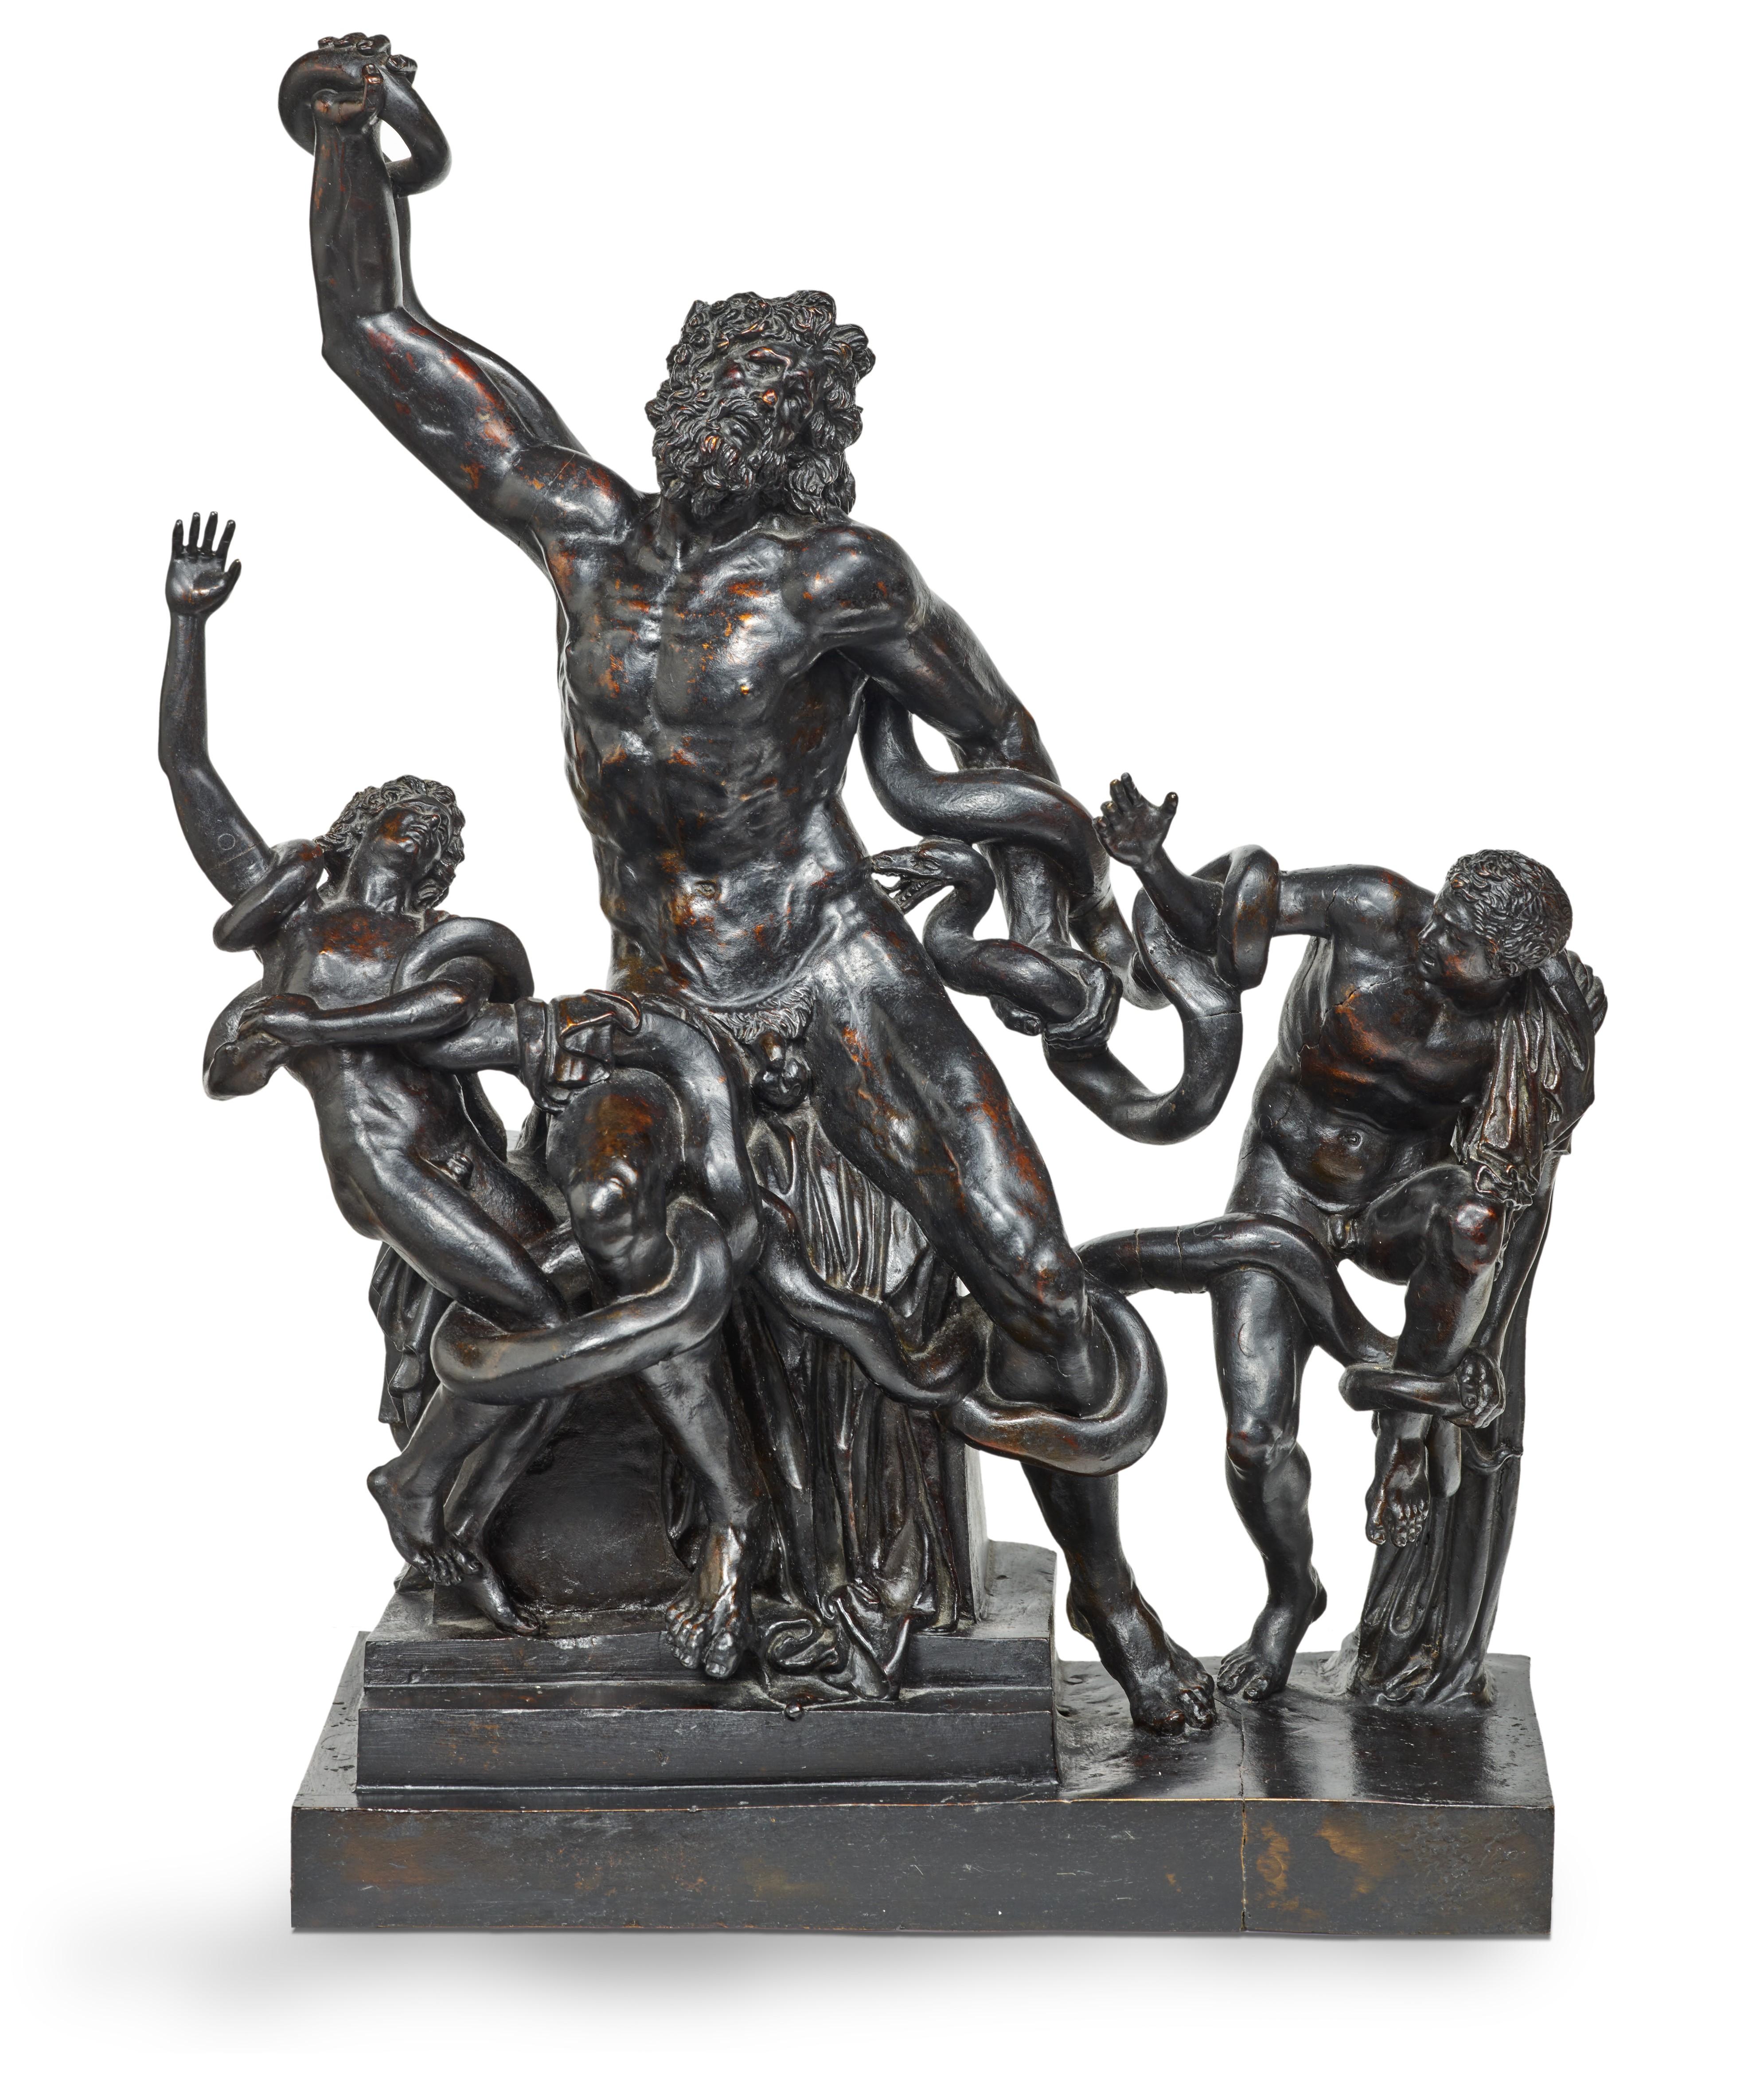 This exceptional bronze group (unpublished), executed in Rome in the second half of the 18th century, bears witness to the fascination with the Laocoön since its discovery on January 14, 1506 on the Esquiline, the site of Nero's Golden House and